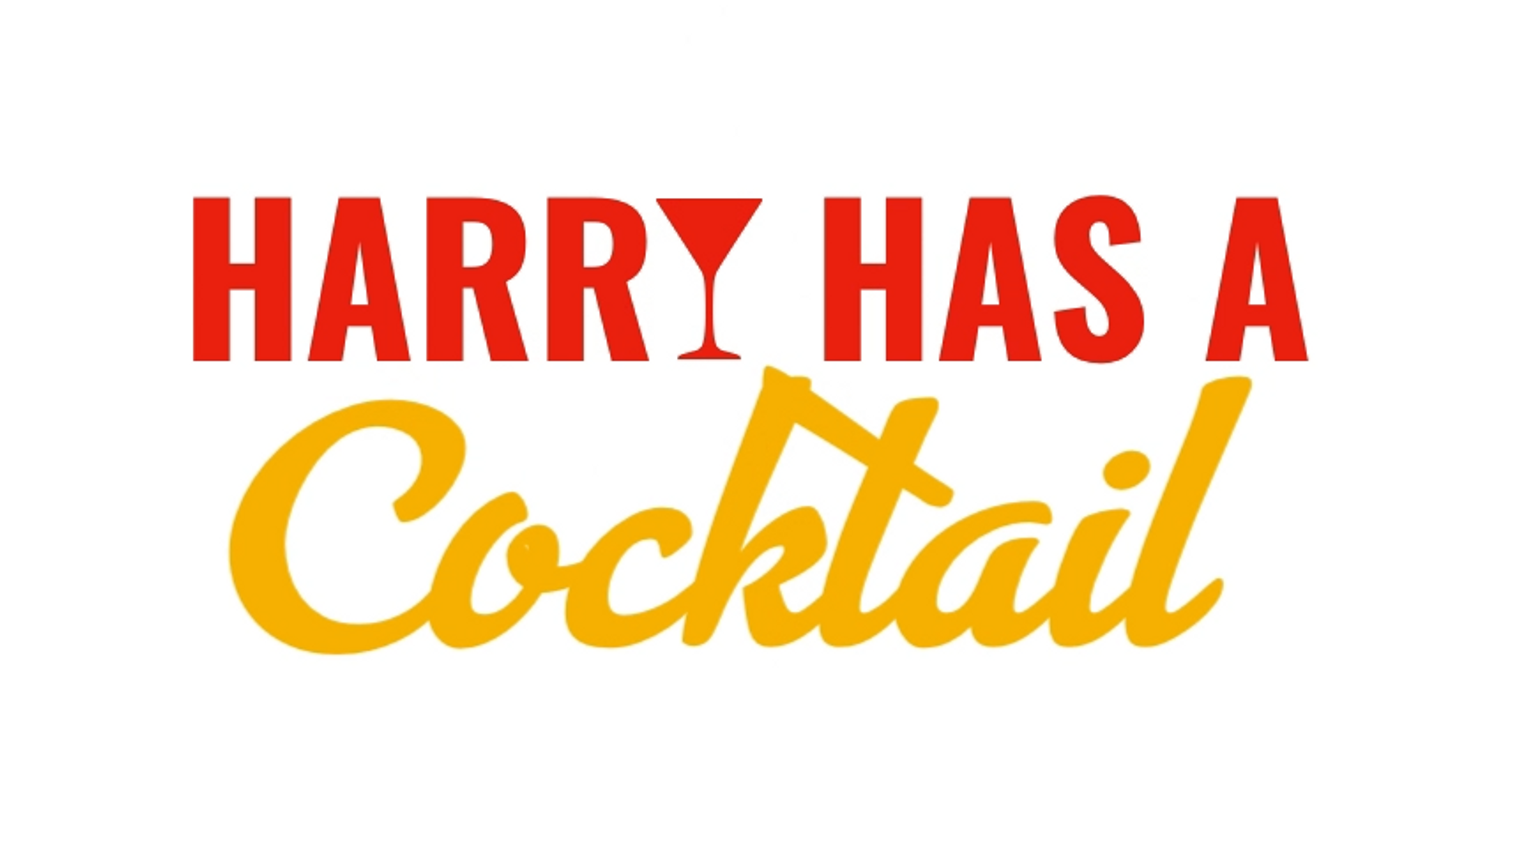 HARRY HAS A COCKTAIL